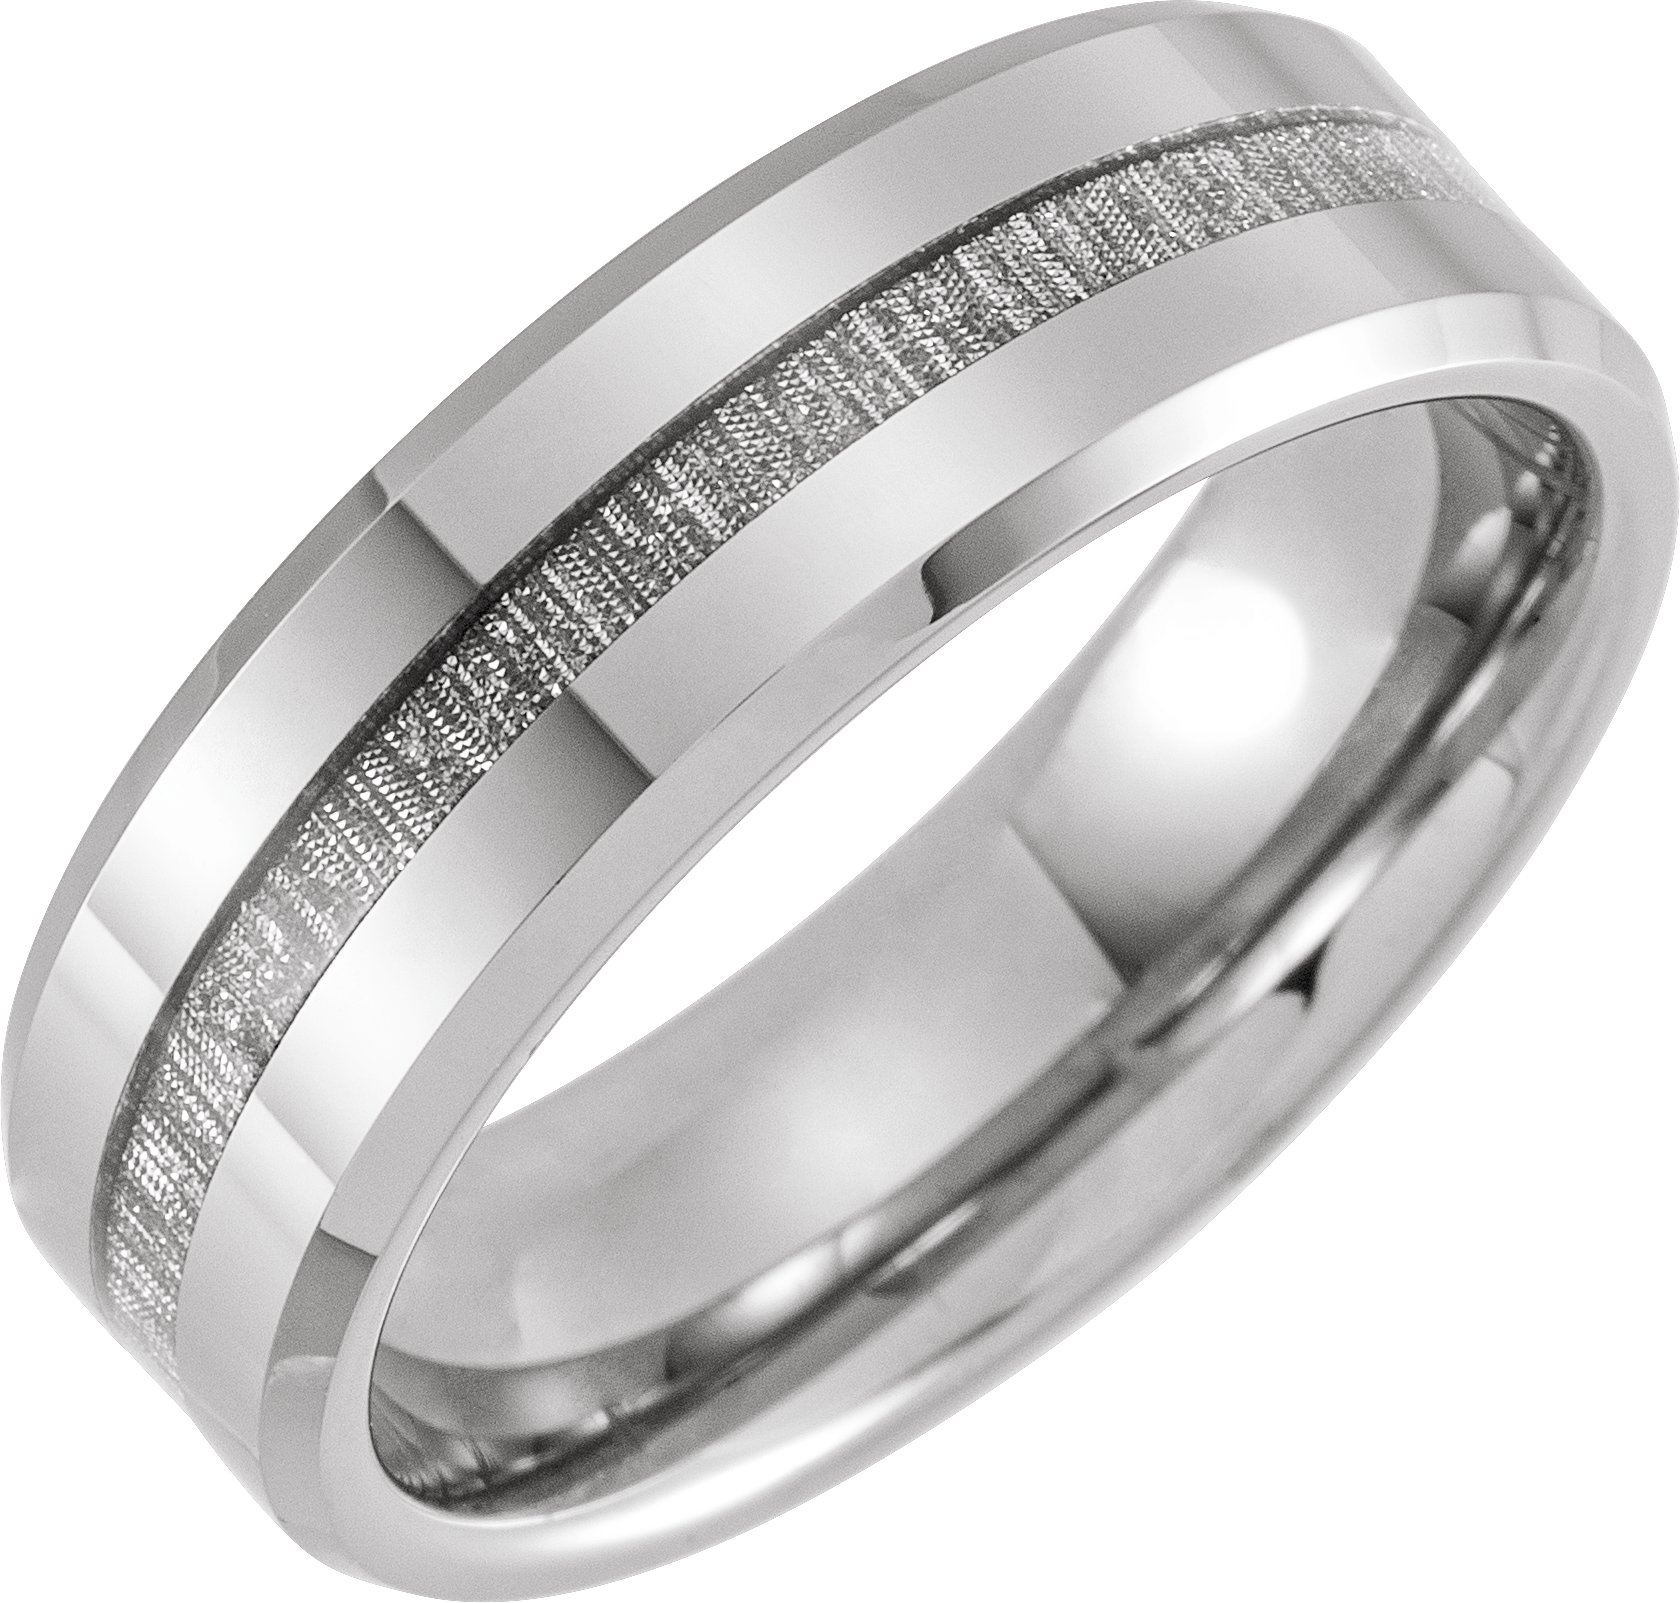 Tungsten 8 mm Beveled Band with Manmade Meteorite Inlay Size 13.5